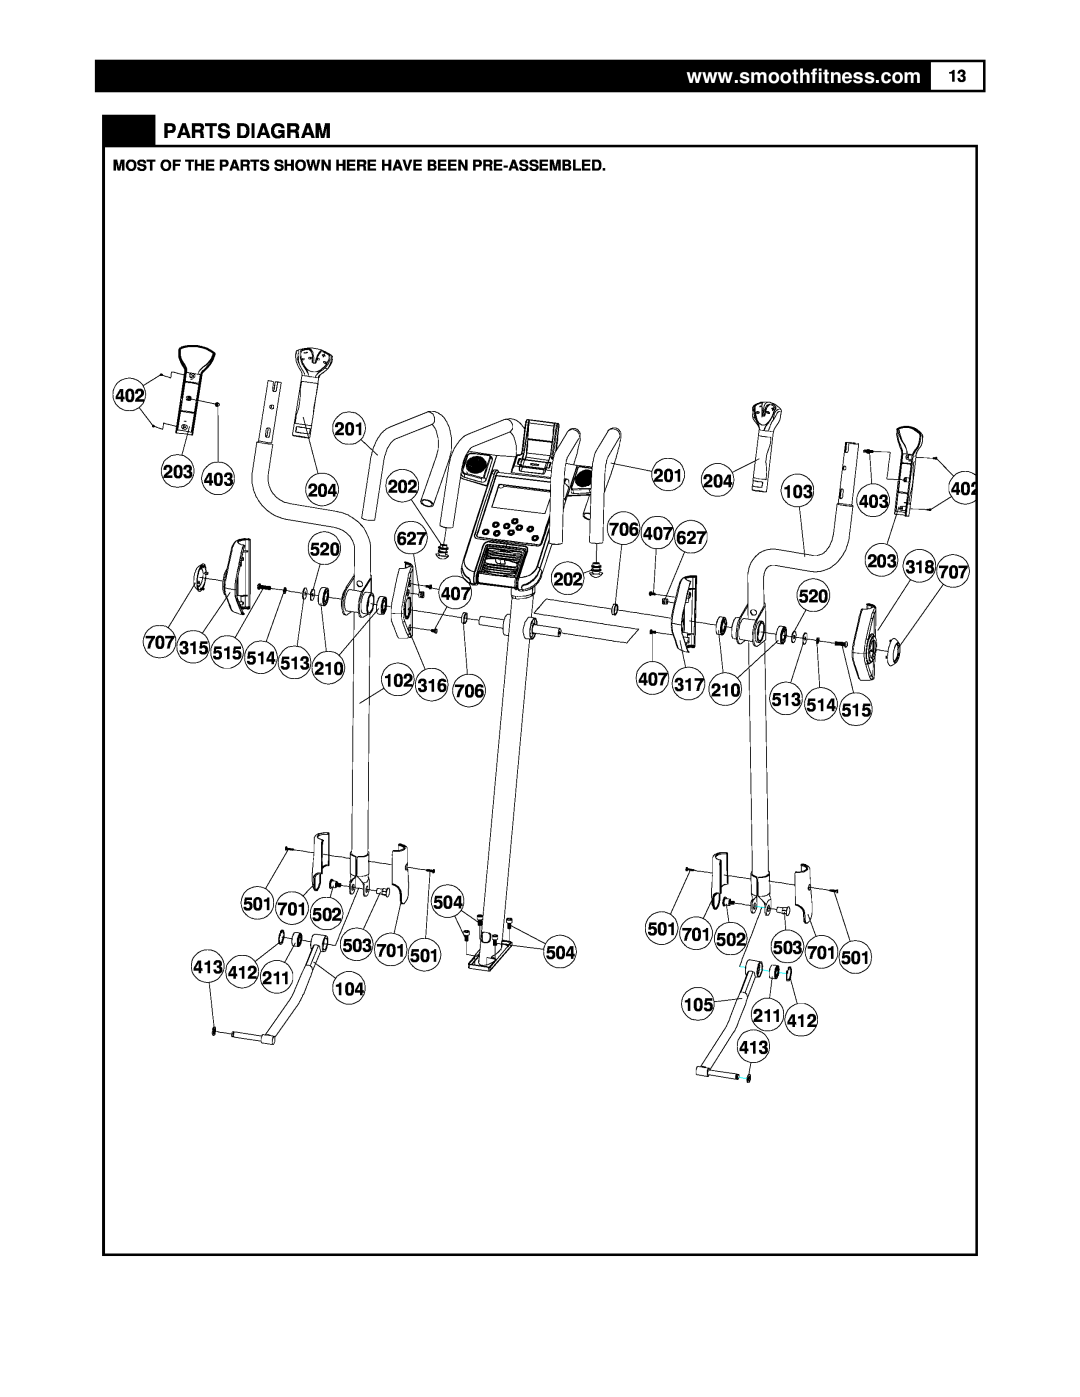 Smooth Fitness DMT X2 user manual Parts Diagram, Most Of The Parts Shown Here Have Been Pre-Assembled 